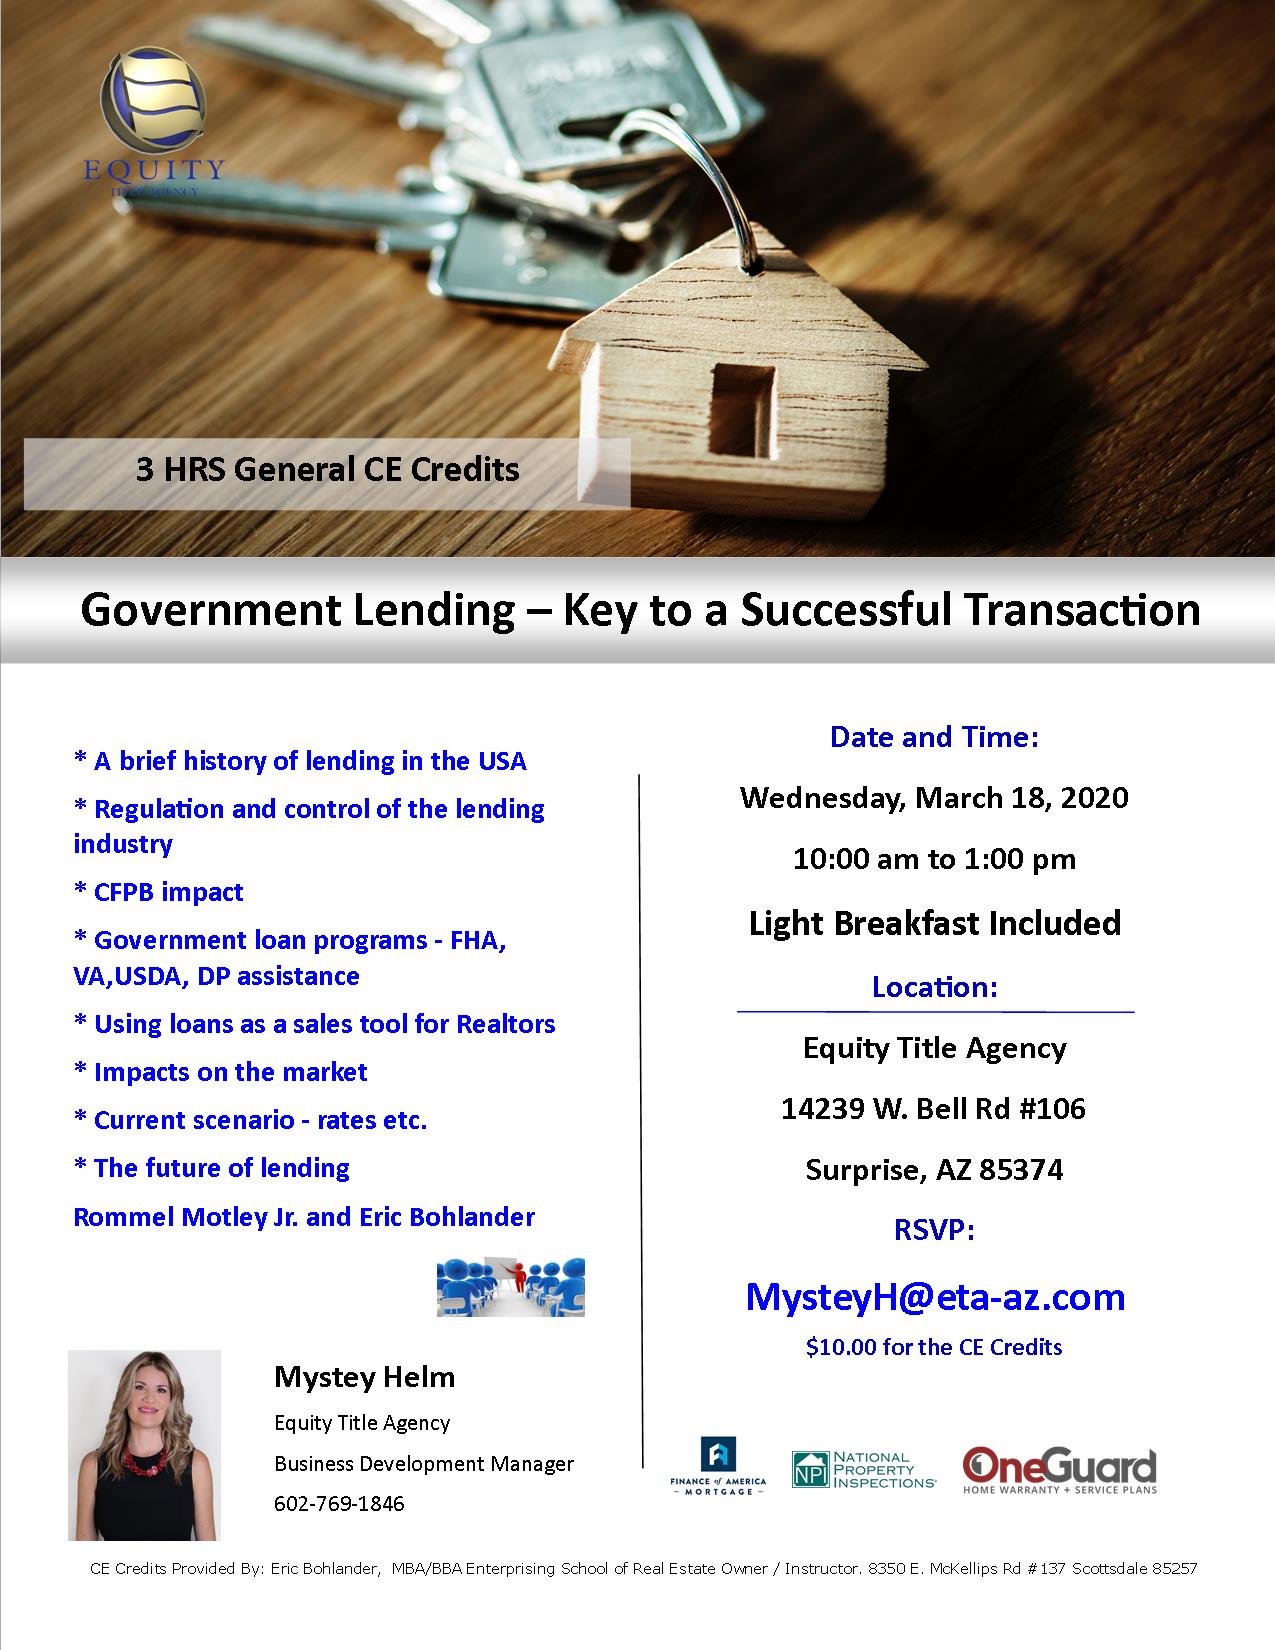 Government Lending – Keys to a Successful Transaction